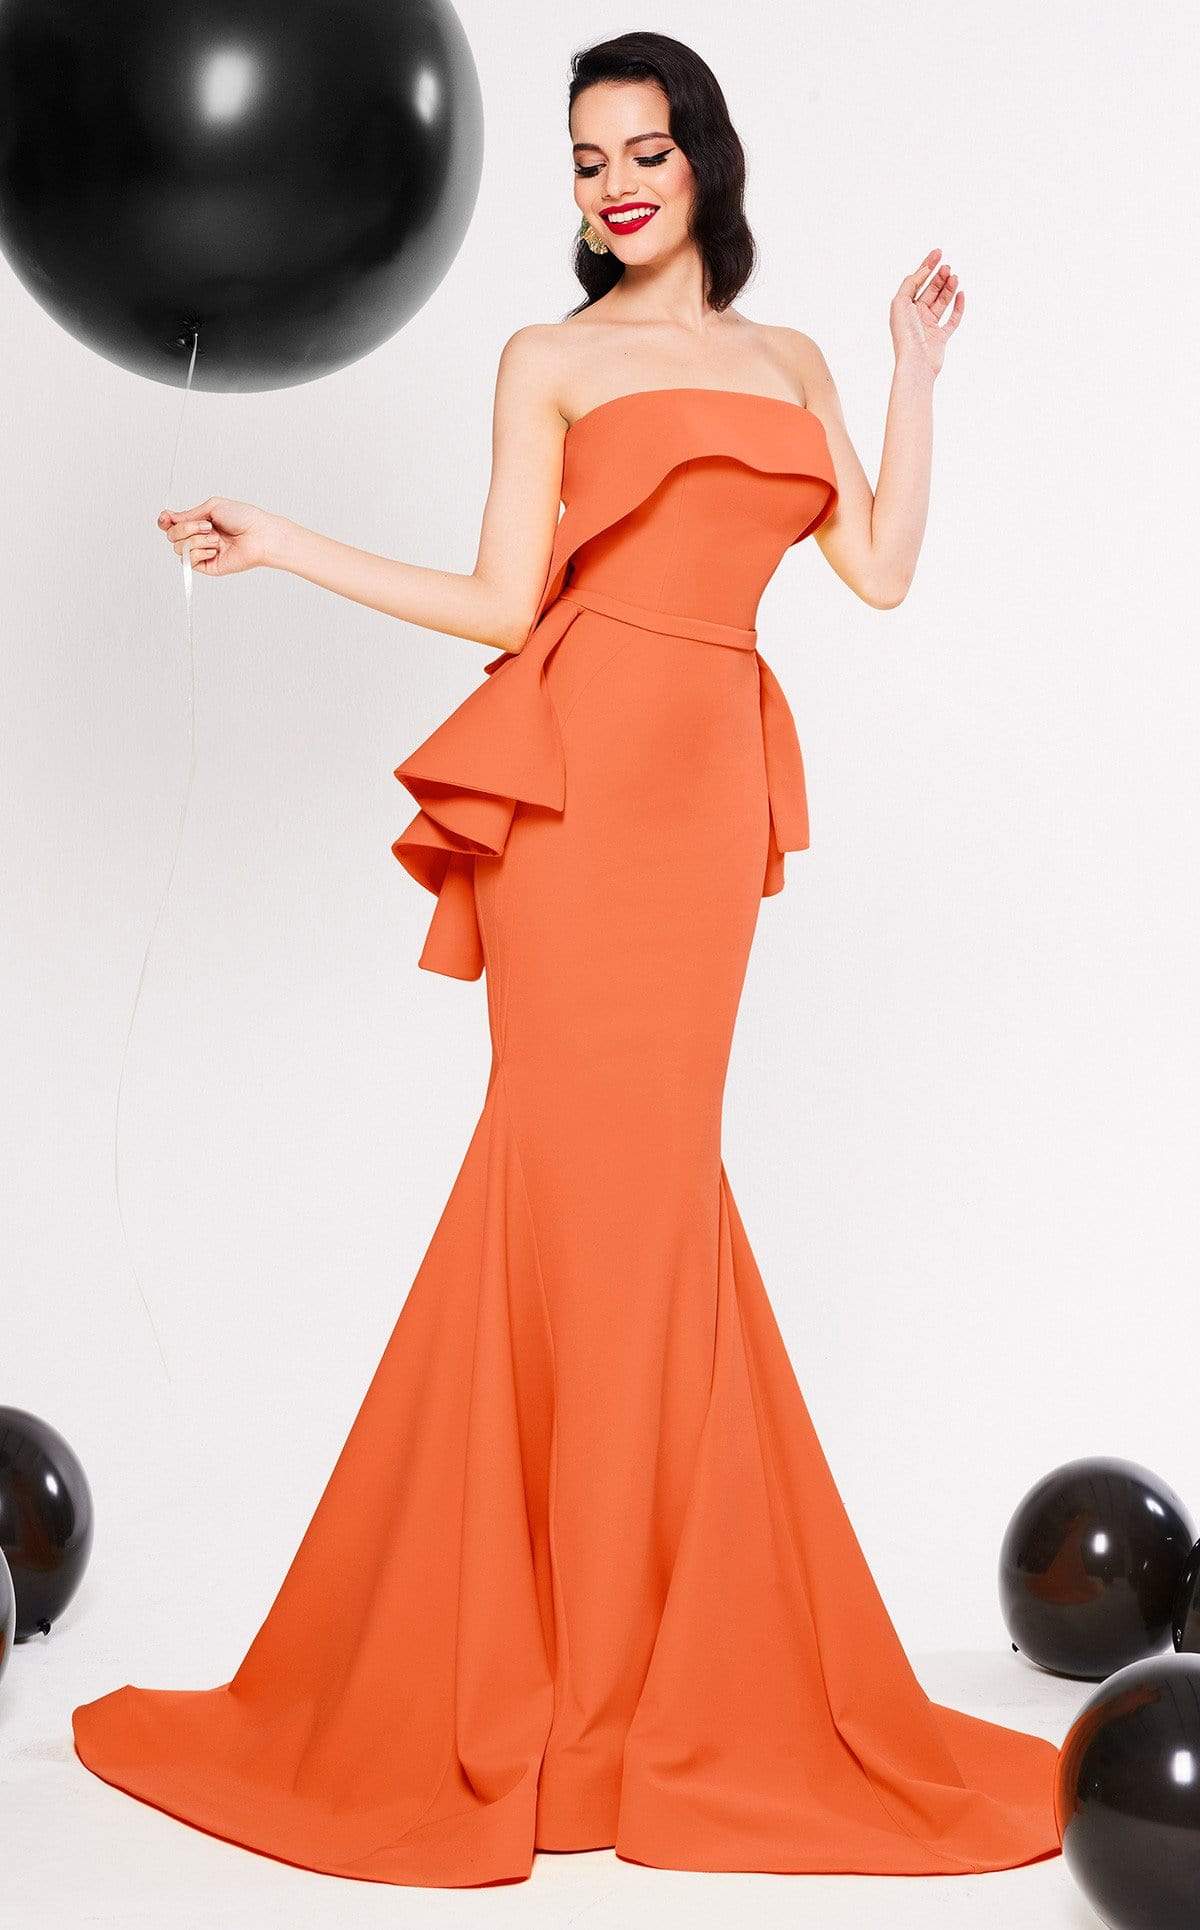 MNM COUTURE - N0325 Strapless Off Shoulder Ruffled Peplum Mermaid Gown Prom Dresses 4 / Coral